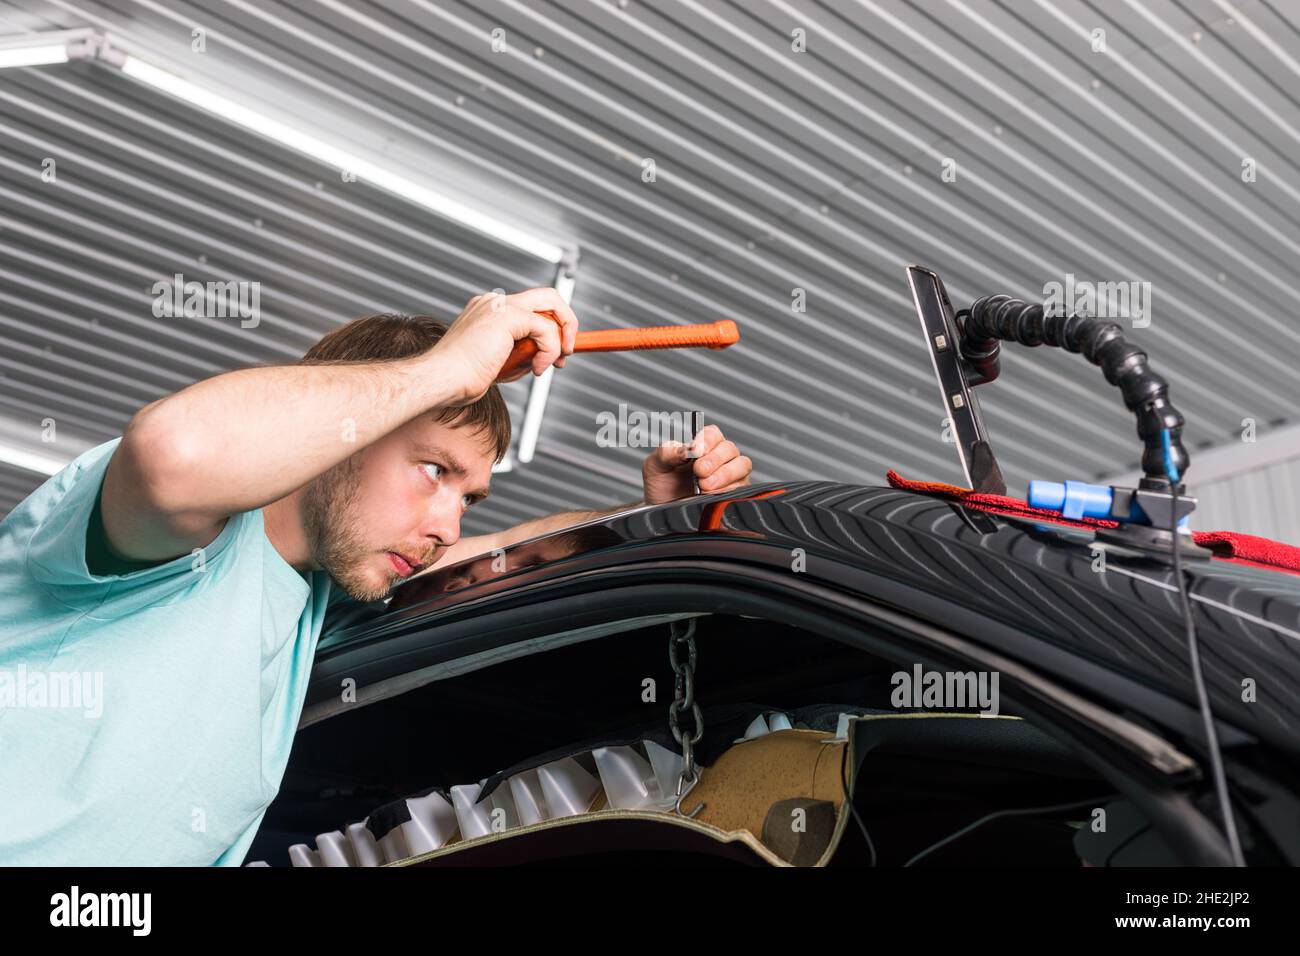 Removing dents on a car body without painting. PDR. Stock Photo